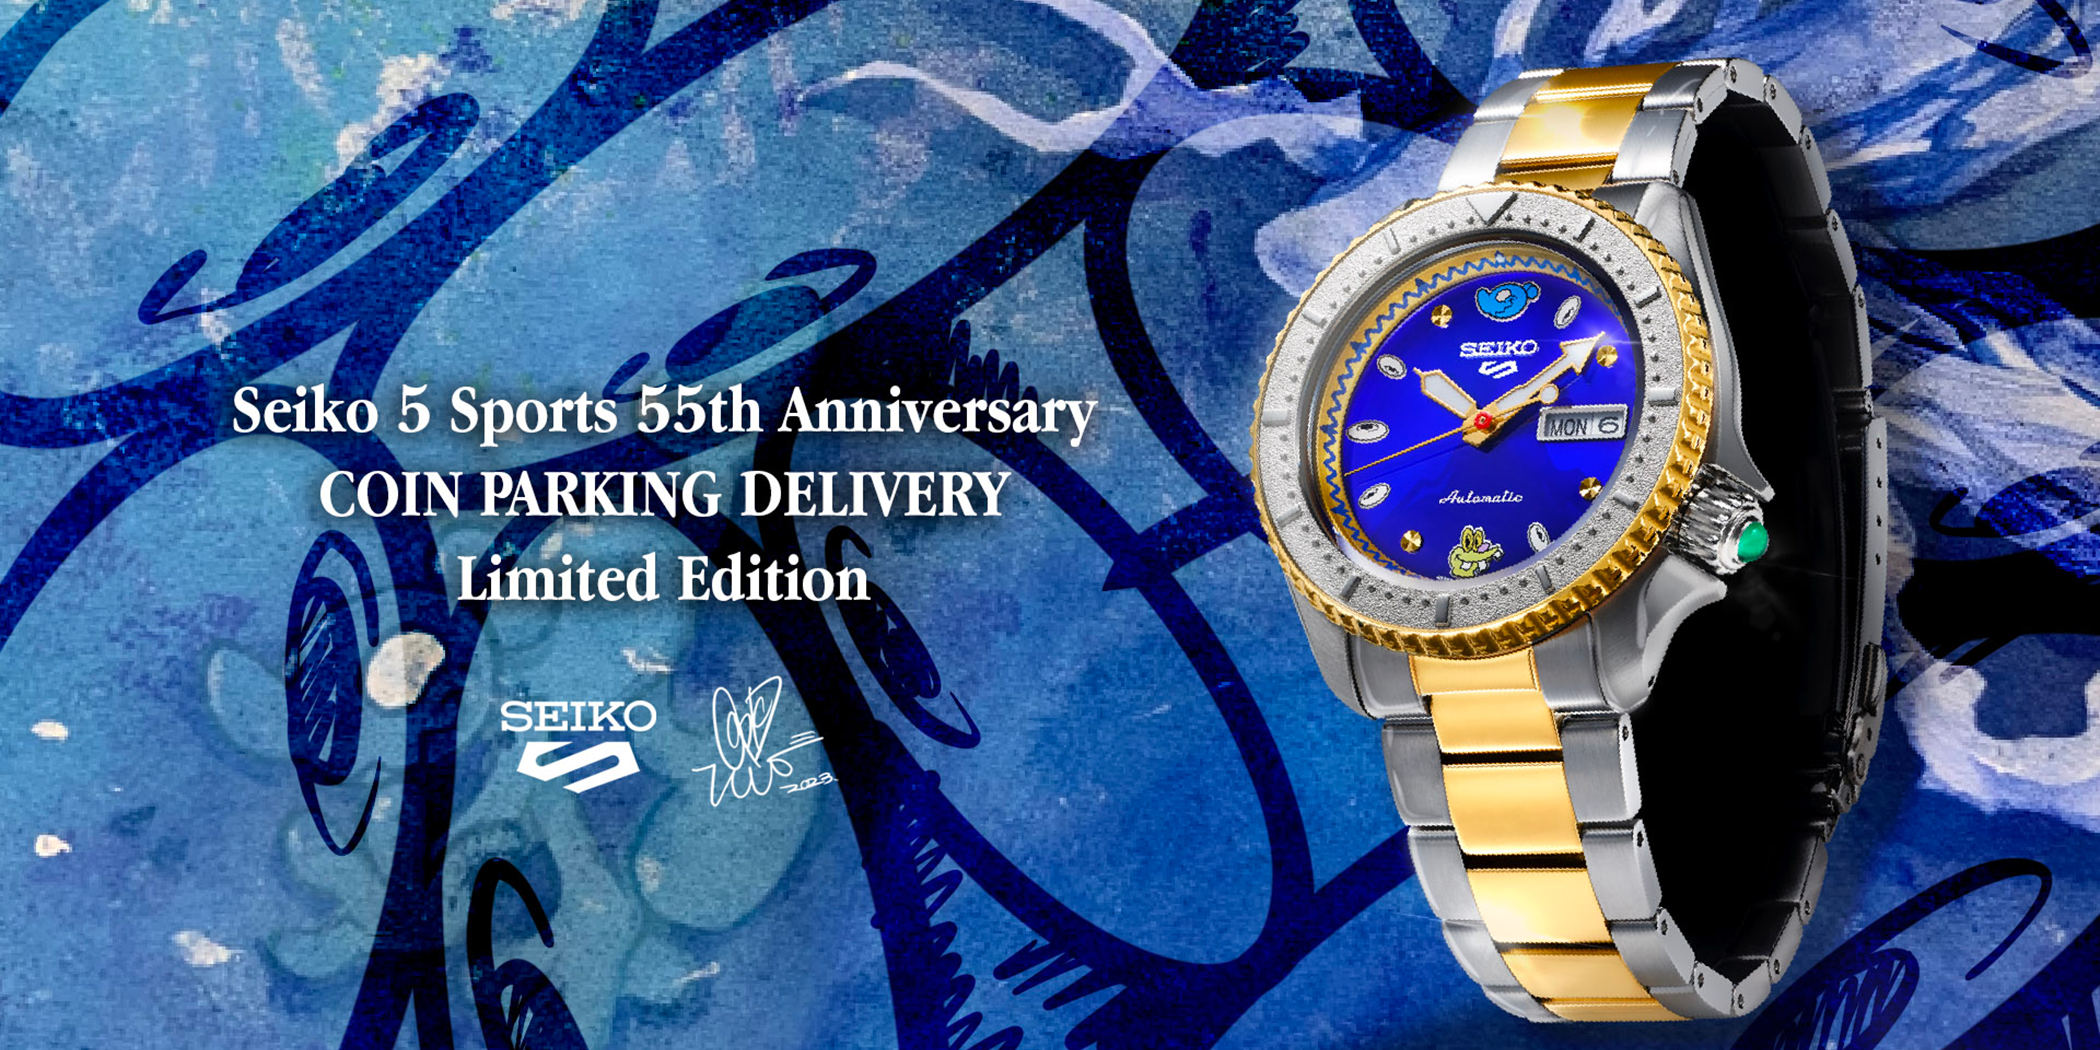 Seiko 5 Sports 55th Anniversary COIN PARKING DELIVERY Limited Edition